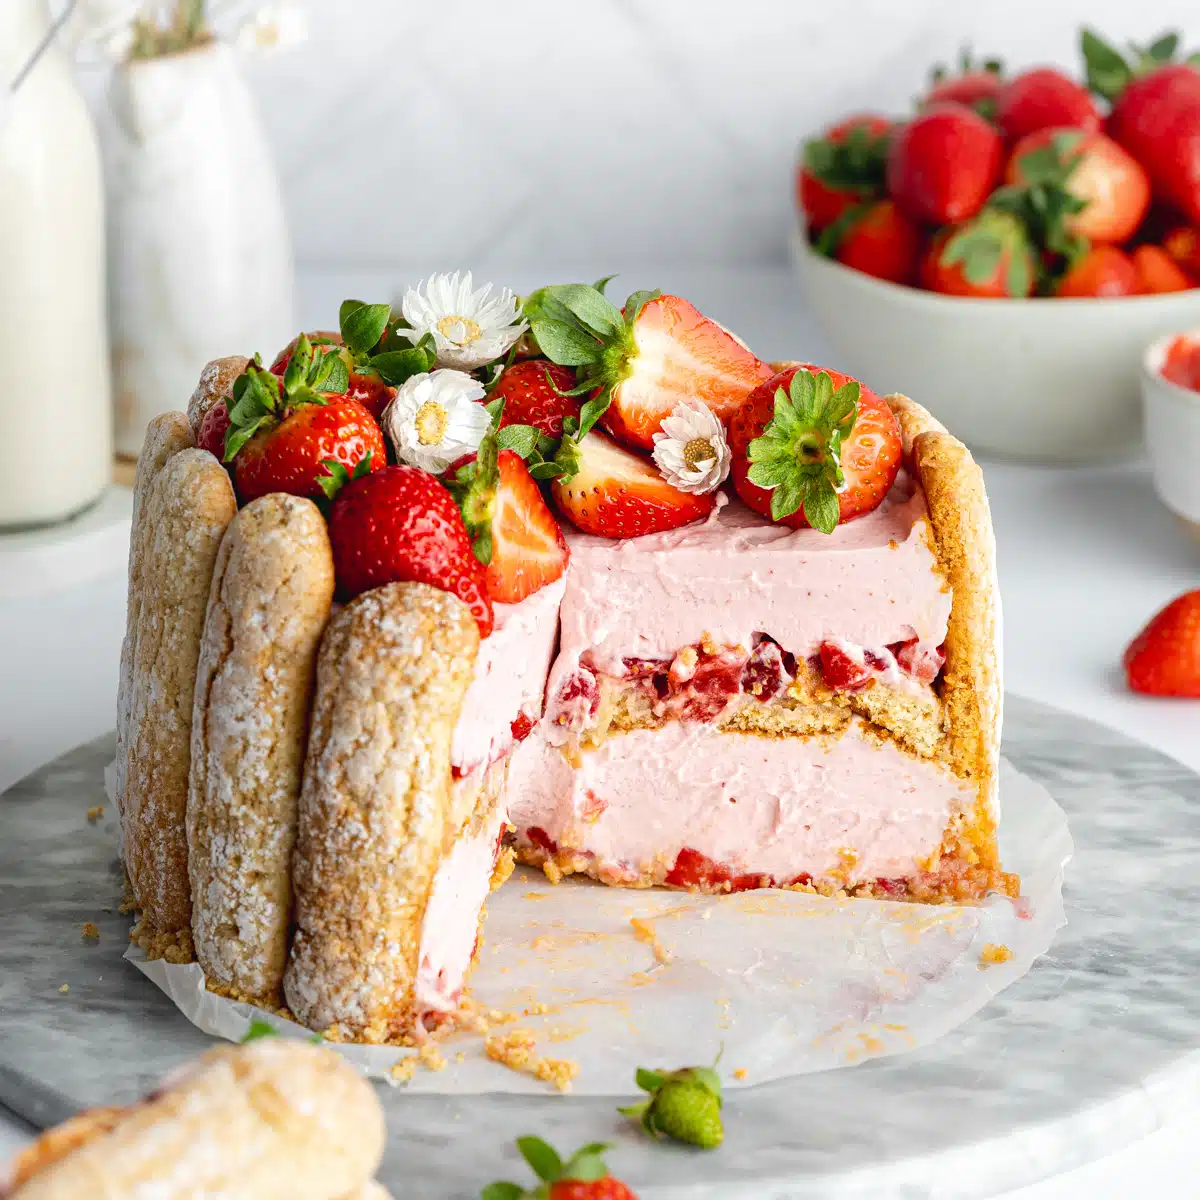 a strawberry charlotte cake topped with fresh berries and with a few slices taken from it showing the layered creamy interior.